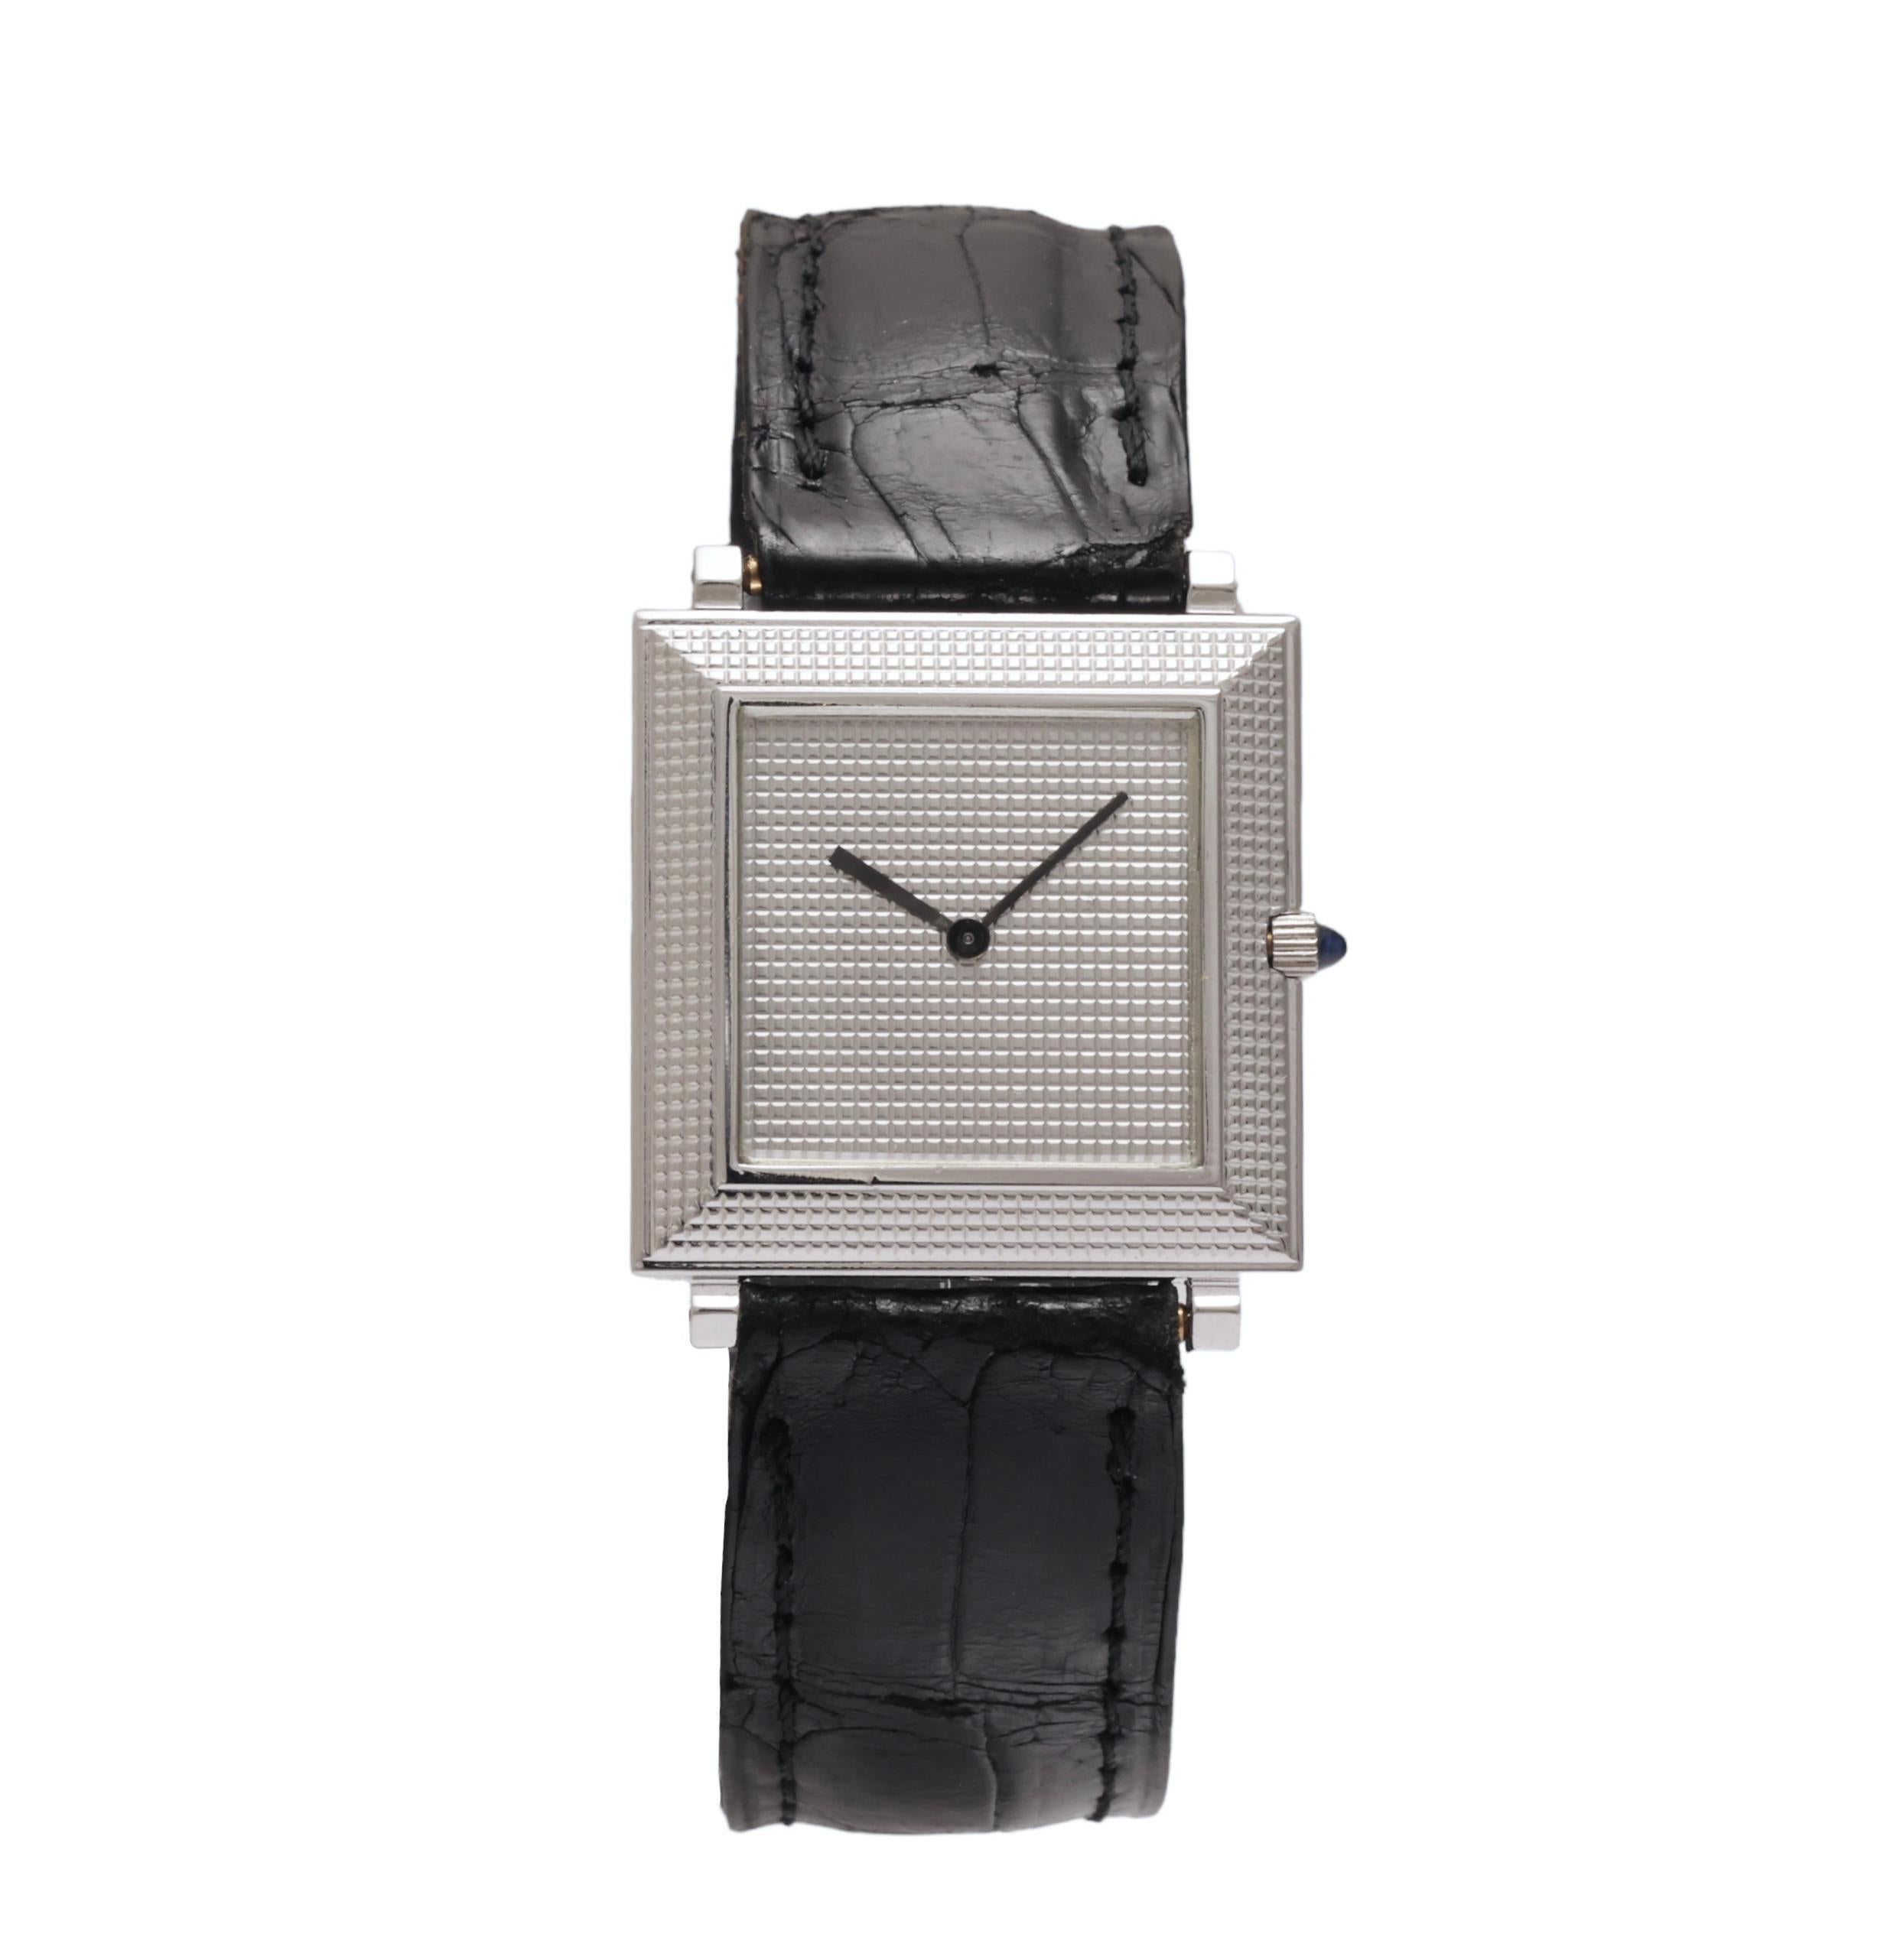 Boucheron Vintage Wristwatch, Extra-Flat Square in 18 kt. White Gold with Textured Dial and Bezel

Movement: mechanical winding

Case: 18 kt. white gold case, measurements 25.5 mm x 25.5 mm x 3.5 mm With Stepped hobnail texture, Clous De Paris